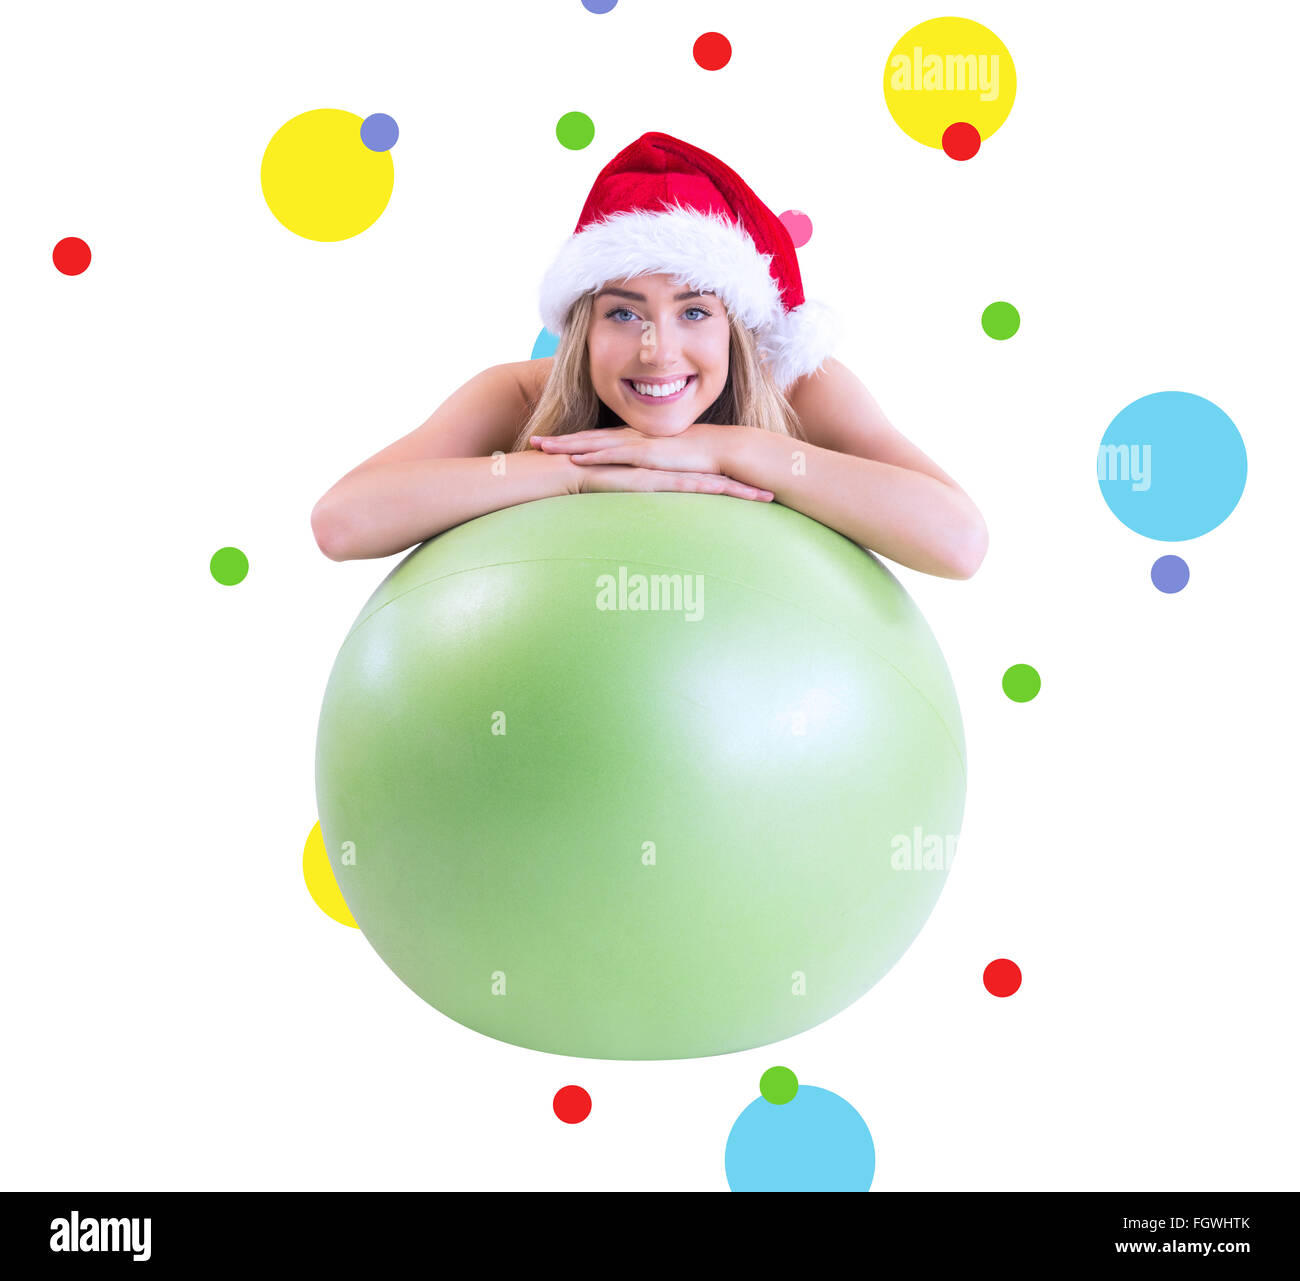 Composite image of festive fit blonde posing with exercise ball Stock Photo